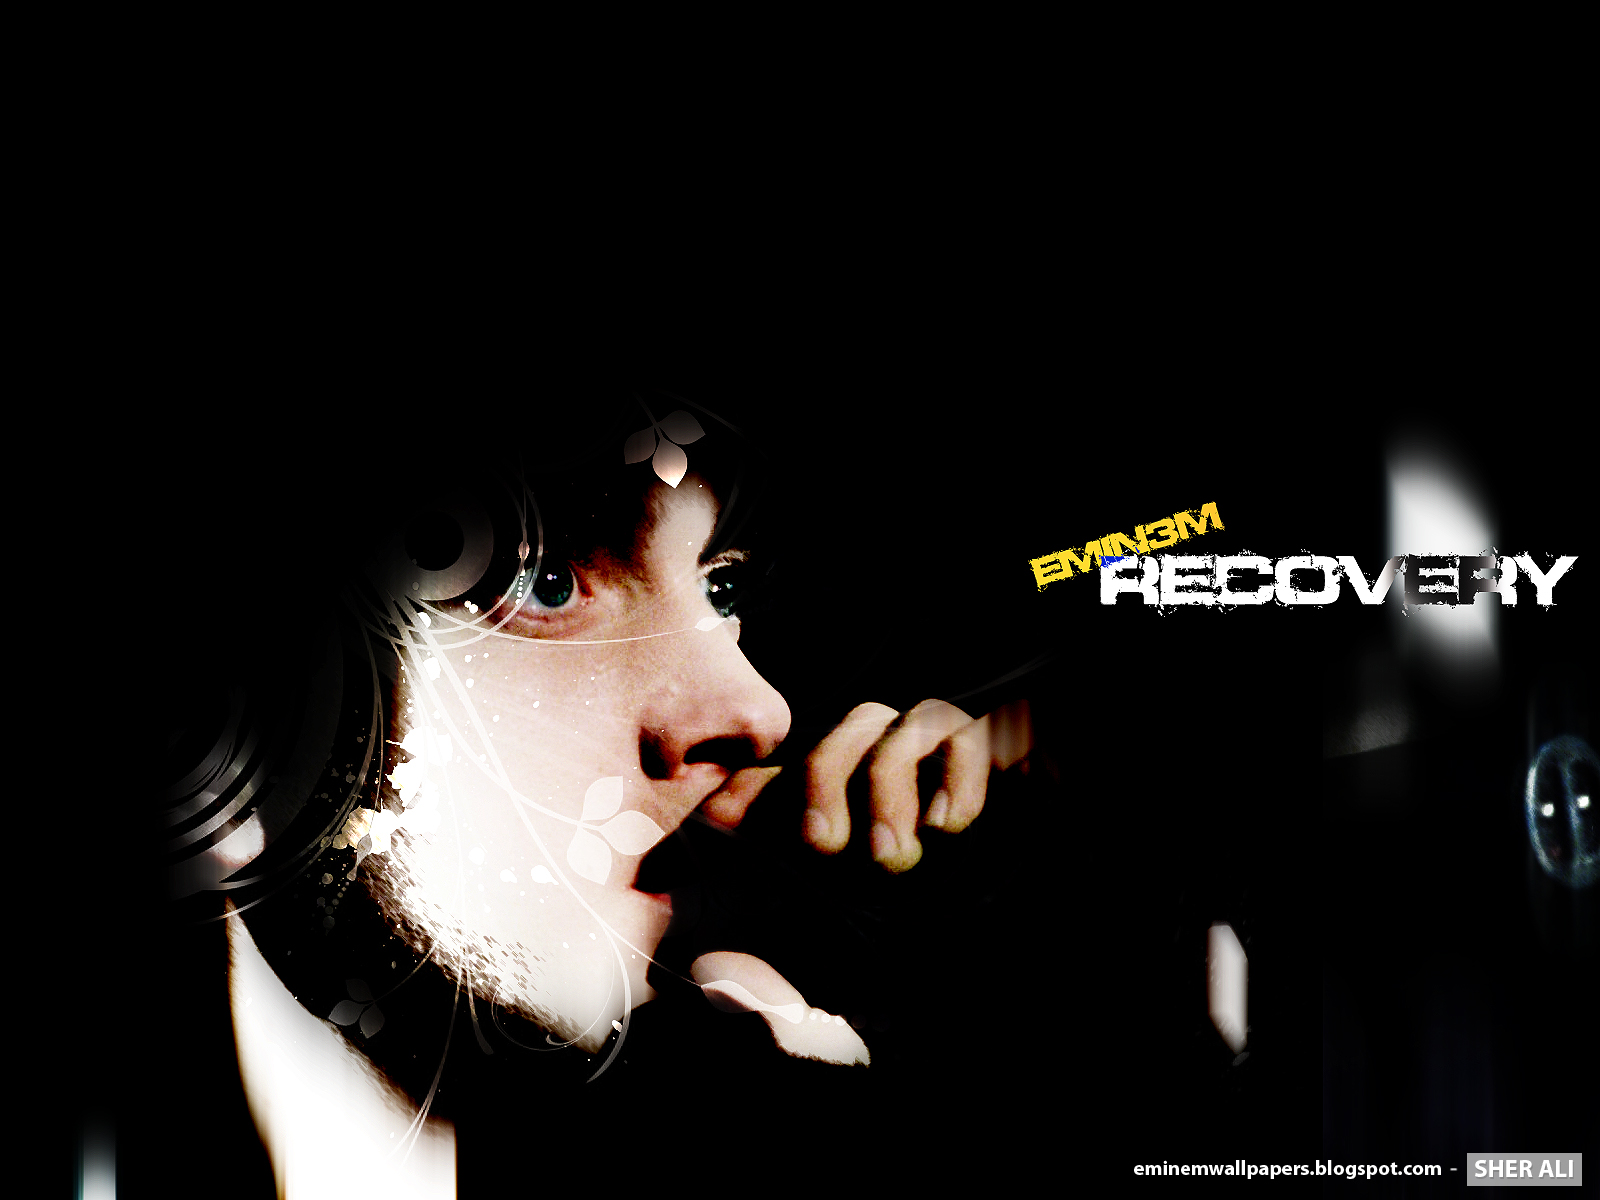 Eminem Wallpaper New Exclusive Recovery